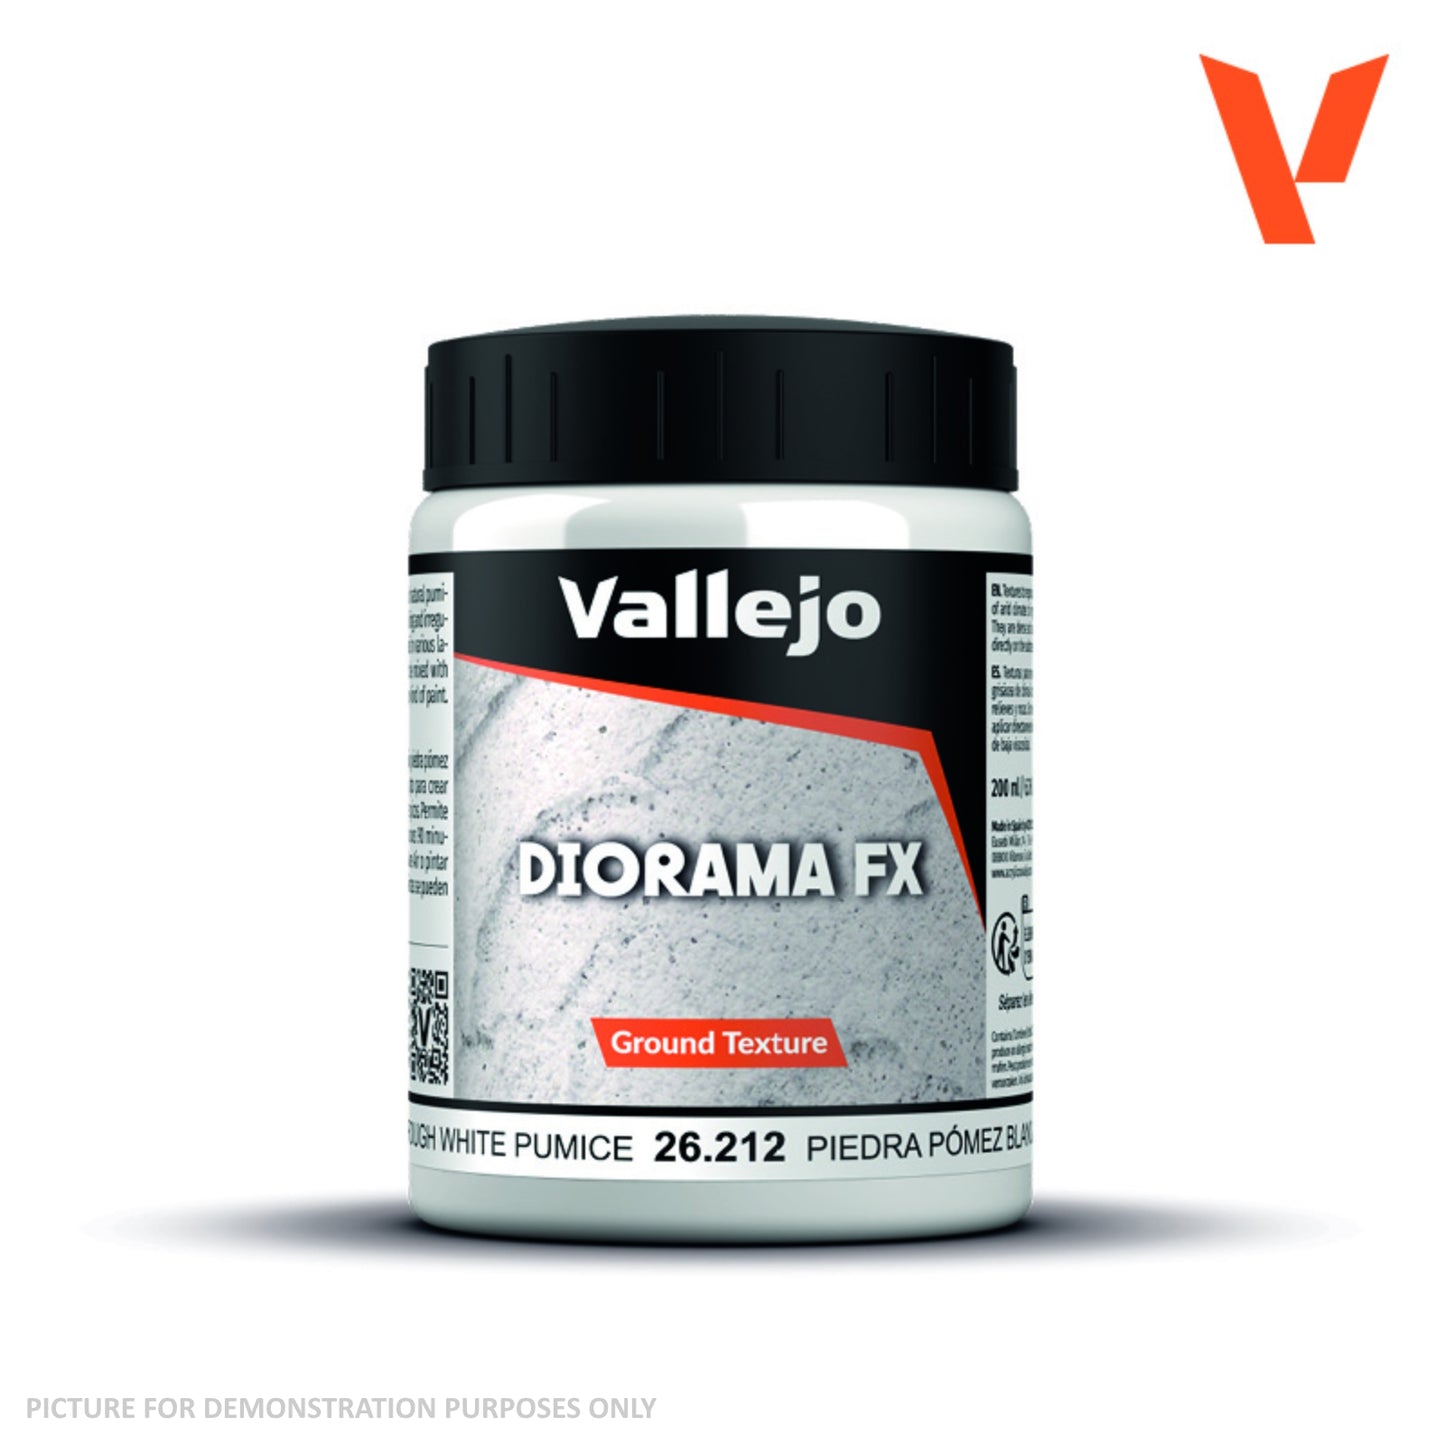 Vallejo Diorama Effects - 26.212 Ground Texture Acrylic Rough White Pumice 200ml